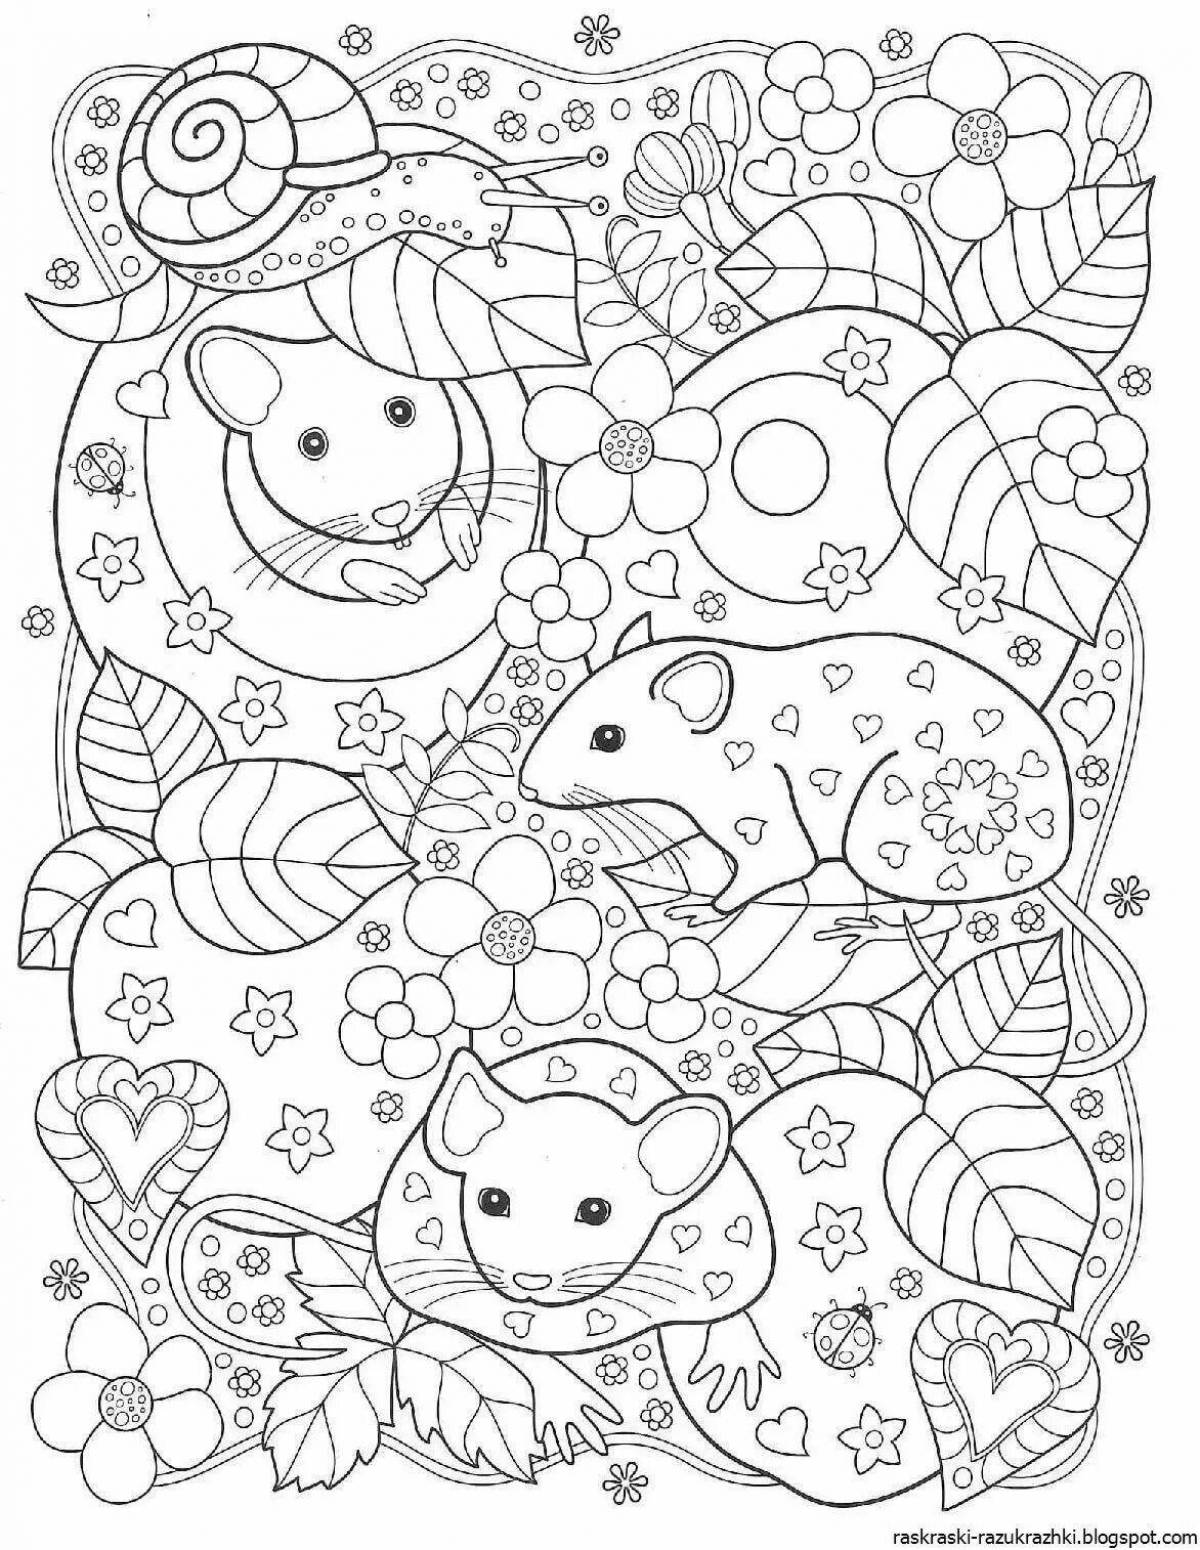 Glitter anti-stress coloring book for girls 8 years old